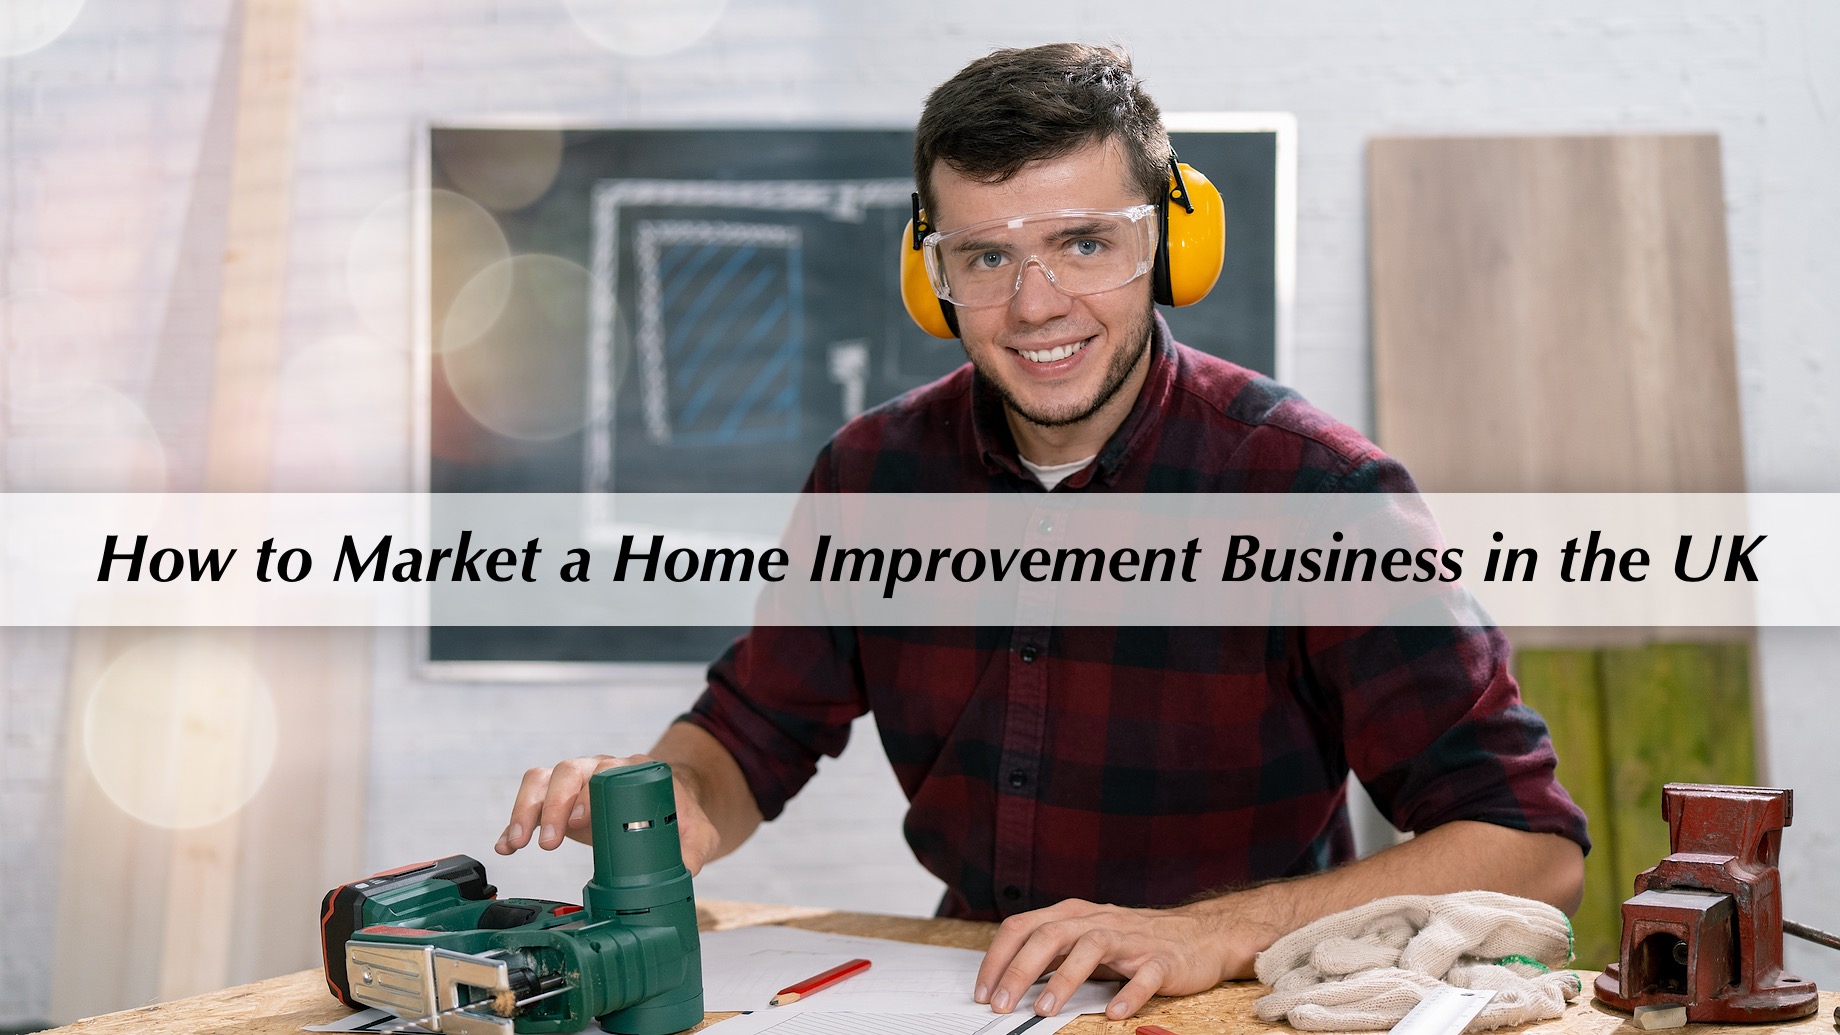 How to Market a Home Improvement Business in the UK